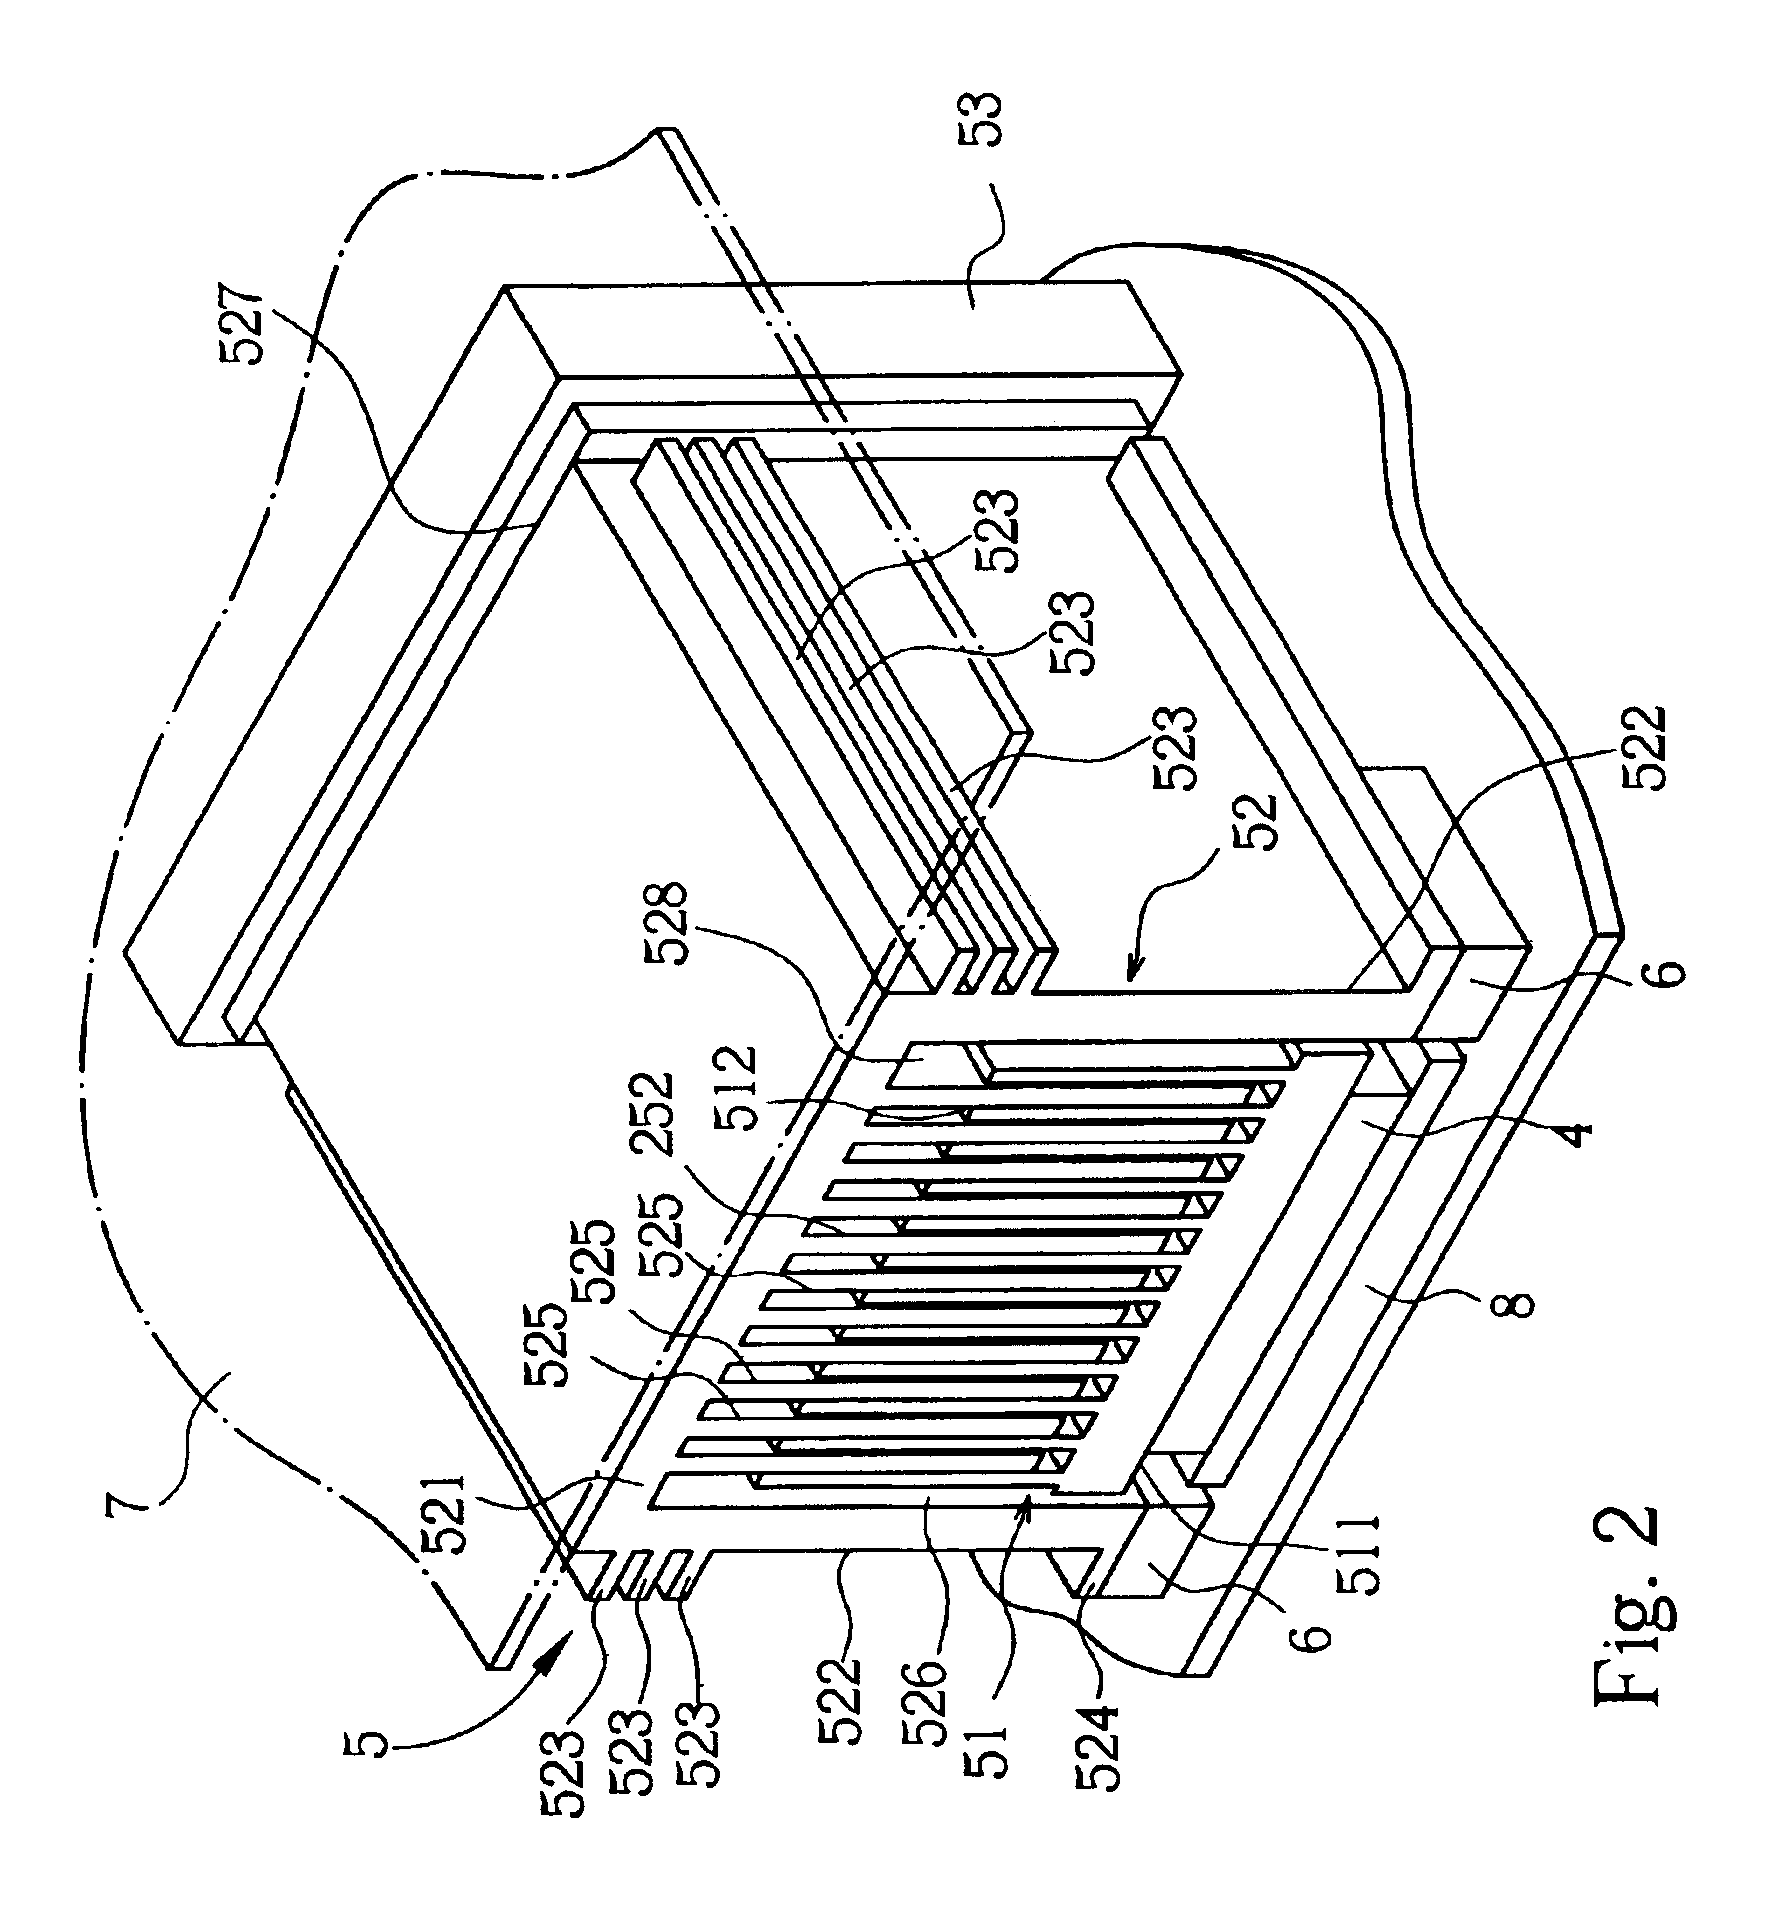 Integrated heat-dissipating module